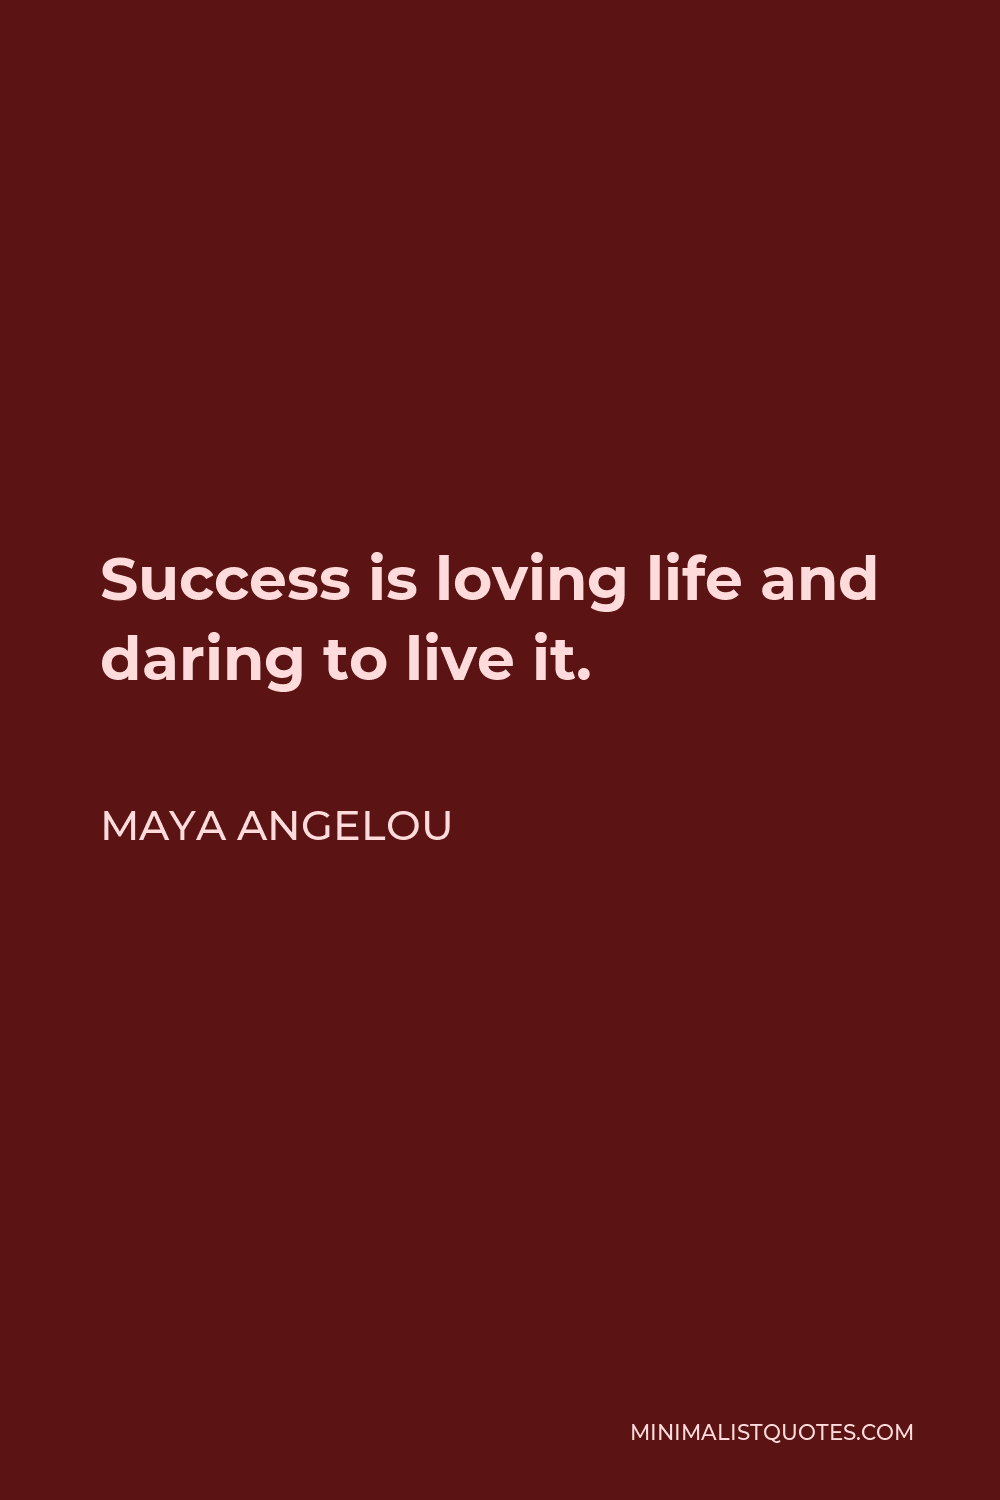 Maya Angelou Quote - Success is loving life and daring to live it.